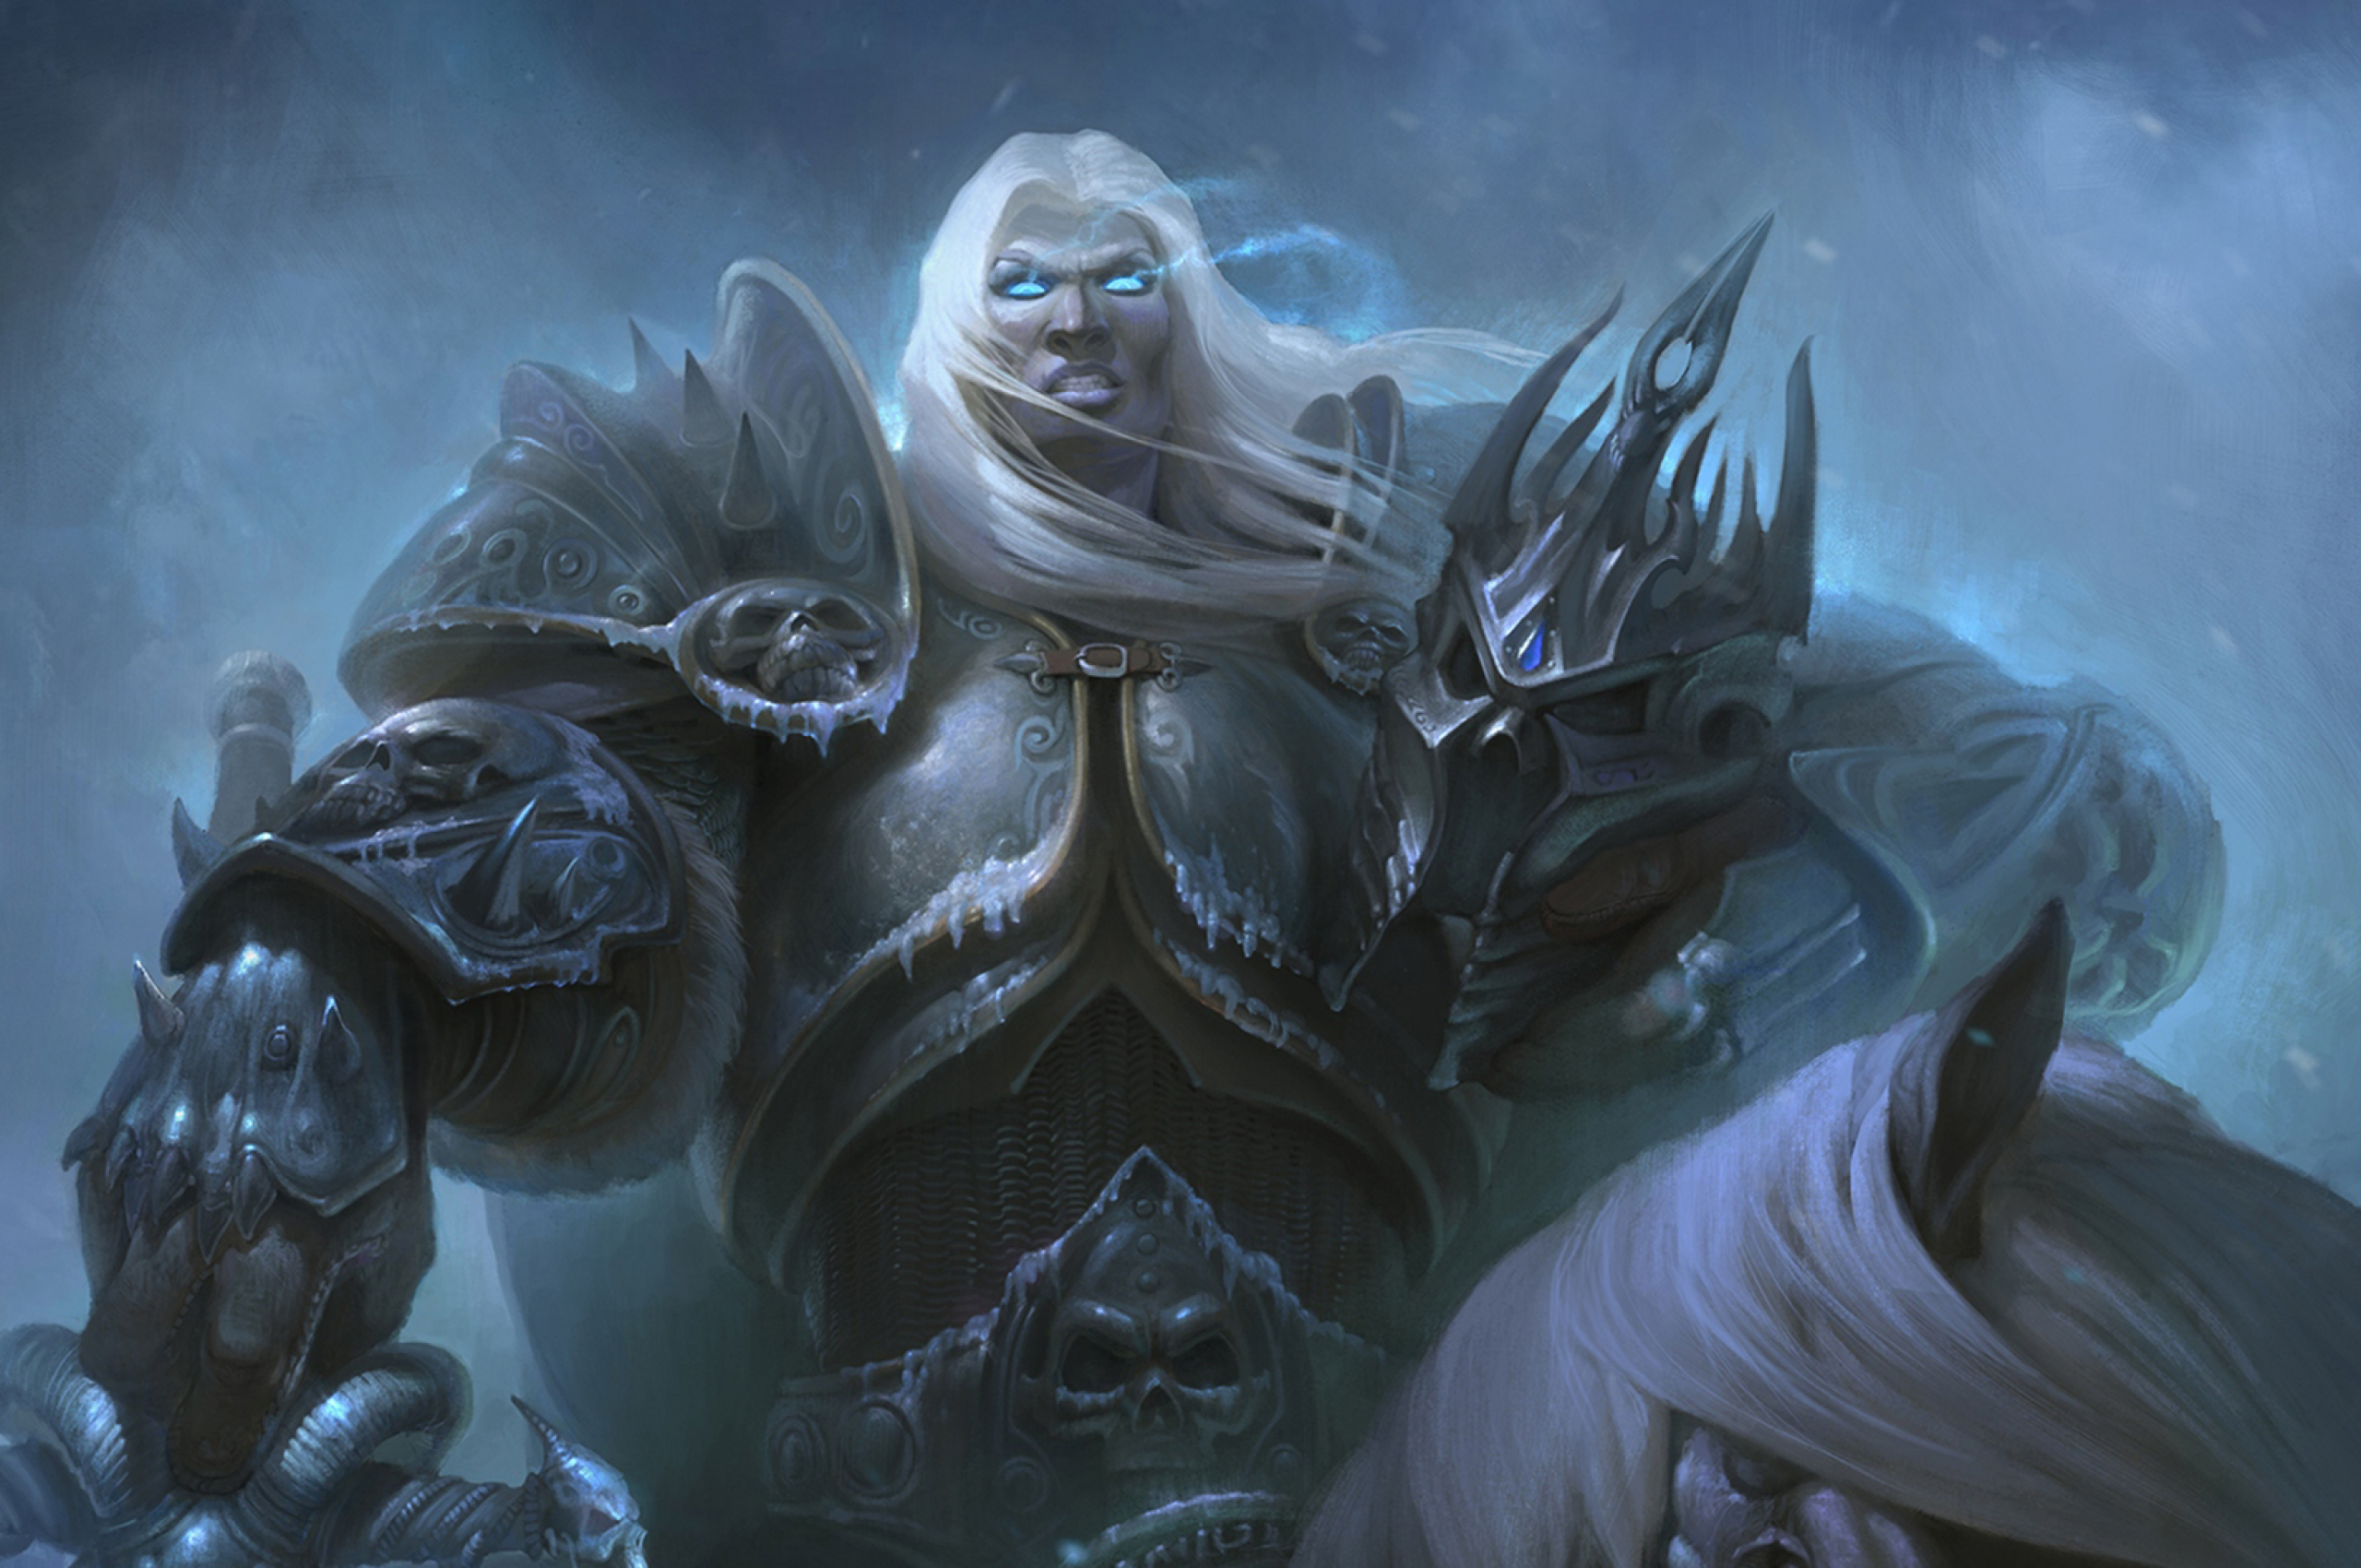 Download 2560x1700 World Of Warcraft: Wrath Of The Lich, Arthas Menethil, Artwork, Painting Wallpaper for Chromebook Pixel